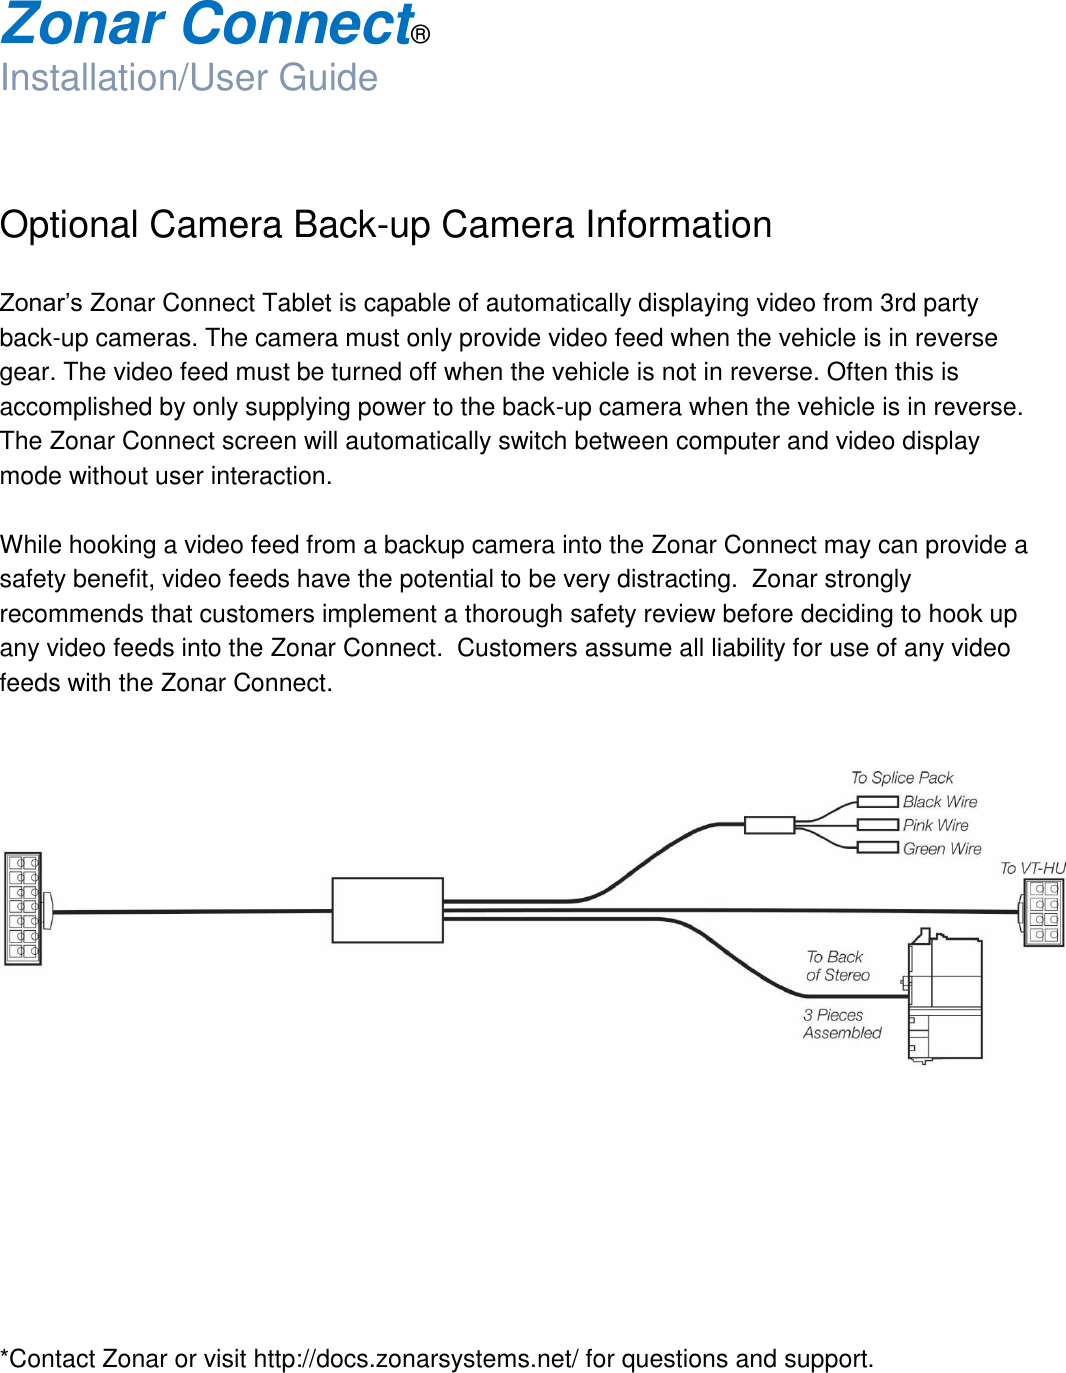  Zonar Connect®  Installation/User Guide   Optional Camera Back-up Camera Information  Zonar’s Zonar Connect Tablet is capable of automatically displaying video from 3rd party back-up cameras. The camera must only provide video feed when the vehicle is in reverse gear. The video feed must be turned off when the vehicle is not in reverse. Often this is accomplished by only supplying power to the back-up camera when the vehicle is in reverse. The Zonar Connect screen will automatically switch between computer and video display mode without user interaction.  While hooking a video feed from a backup camera into the Zonar Connect may can provide a safety benefit, video feeds have the potential to be very distracting.  Zonar strongly recommends that customers implement a thorough safety review before deciding to hook up any video feeds into the Zonar Connect.  Customers assume all liability for use of any video feeds with the Zonar Connect.             *Contact Zonar or visit http://docs.zonarsystems.net/ for questions and support.   